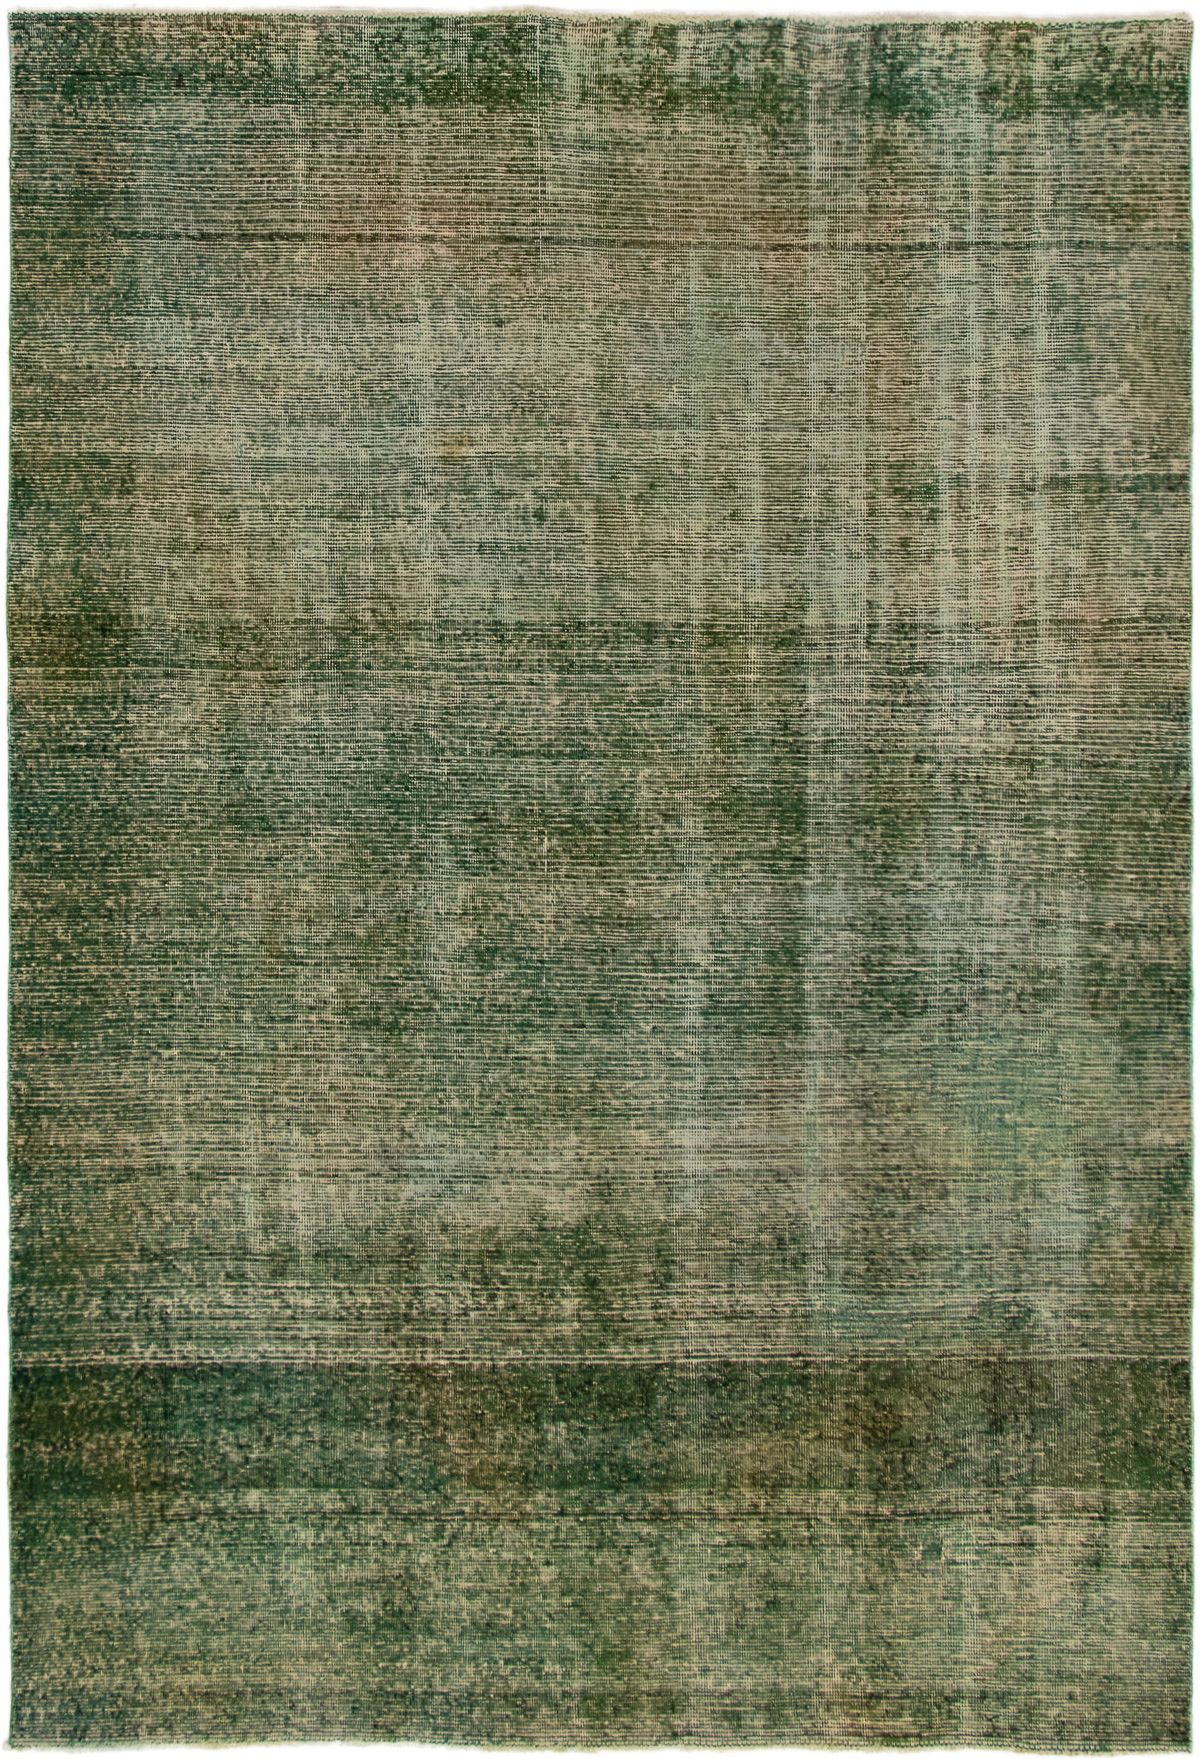 Hand-knotted Color Transition Green Wool Rug 6'7" x 9'8" Size: 6'7" x 9'8"  